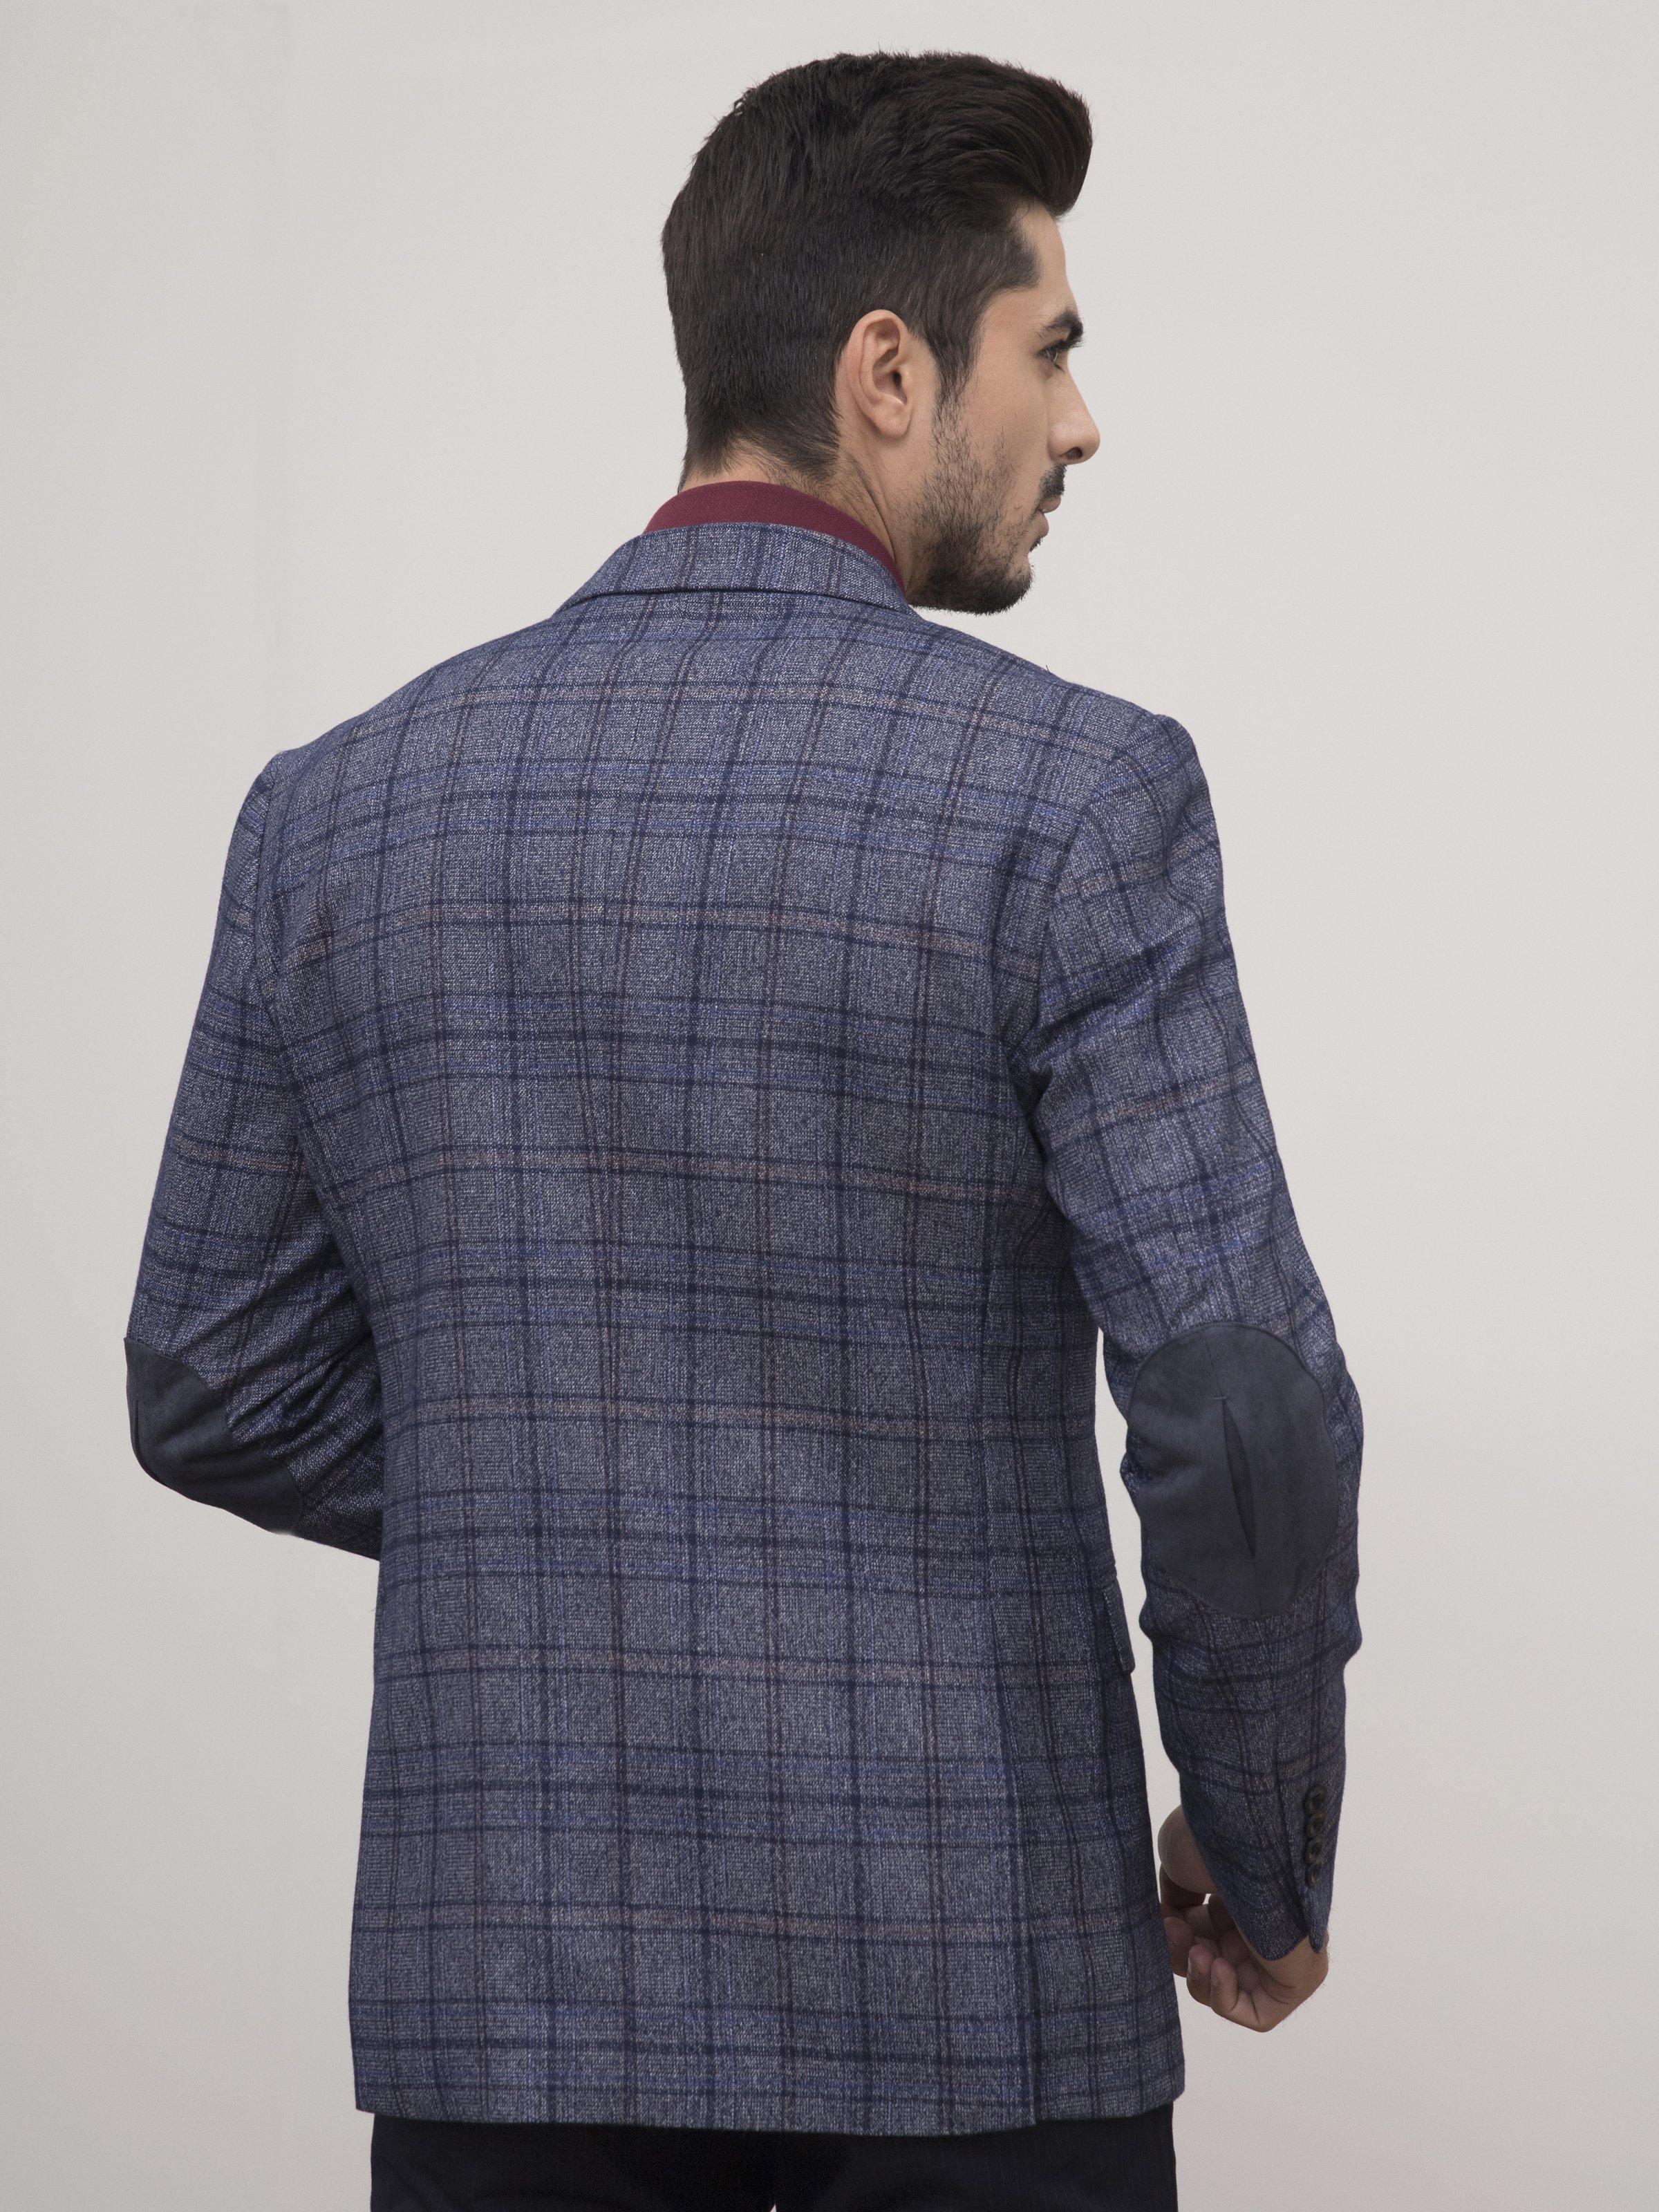 COAT 2 BUTTON SLIM FIT BLUE GREY at Charcoal Clothing